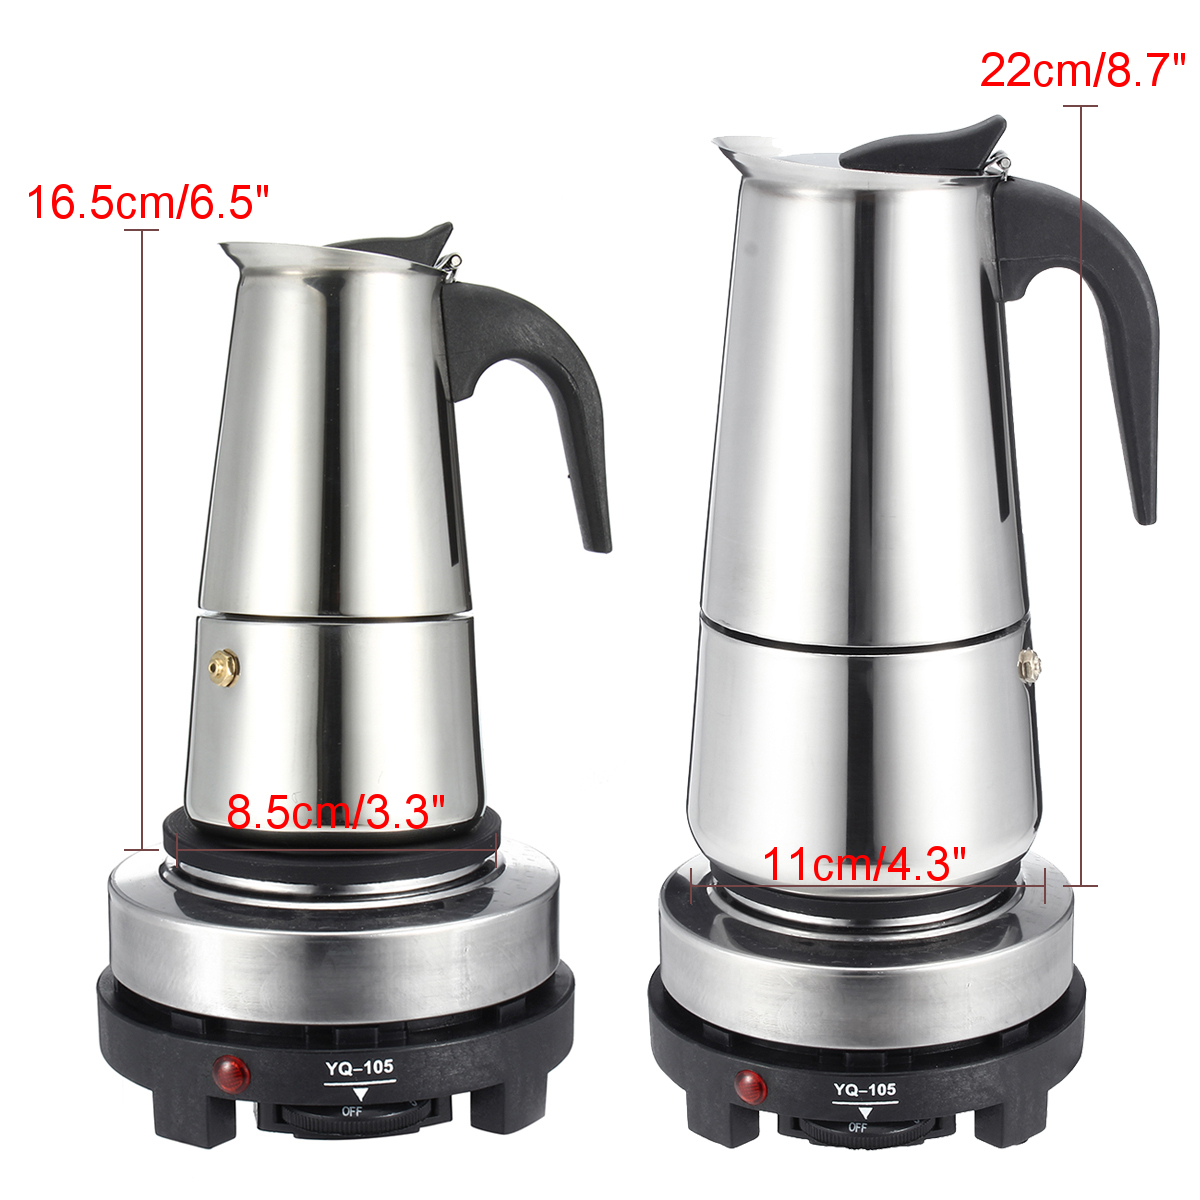 Espresso Moka Coffee Maker Pot Percolator Stainless Steel Electric Stove Electric Coffee Kettle 31